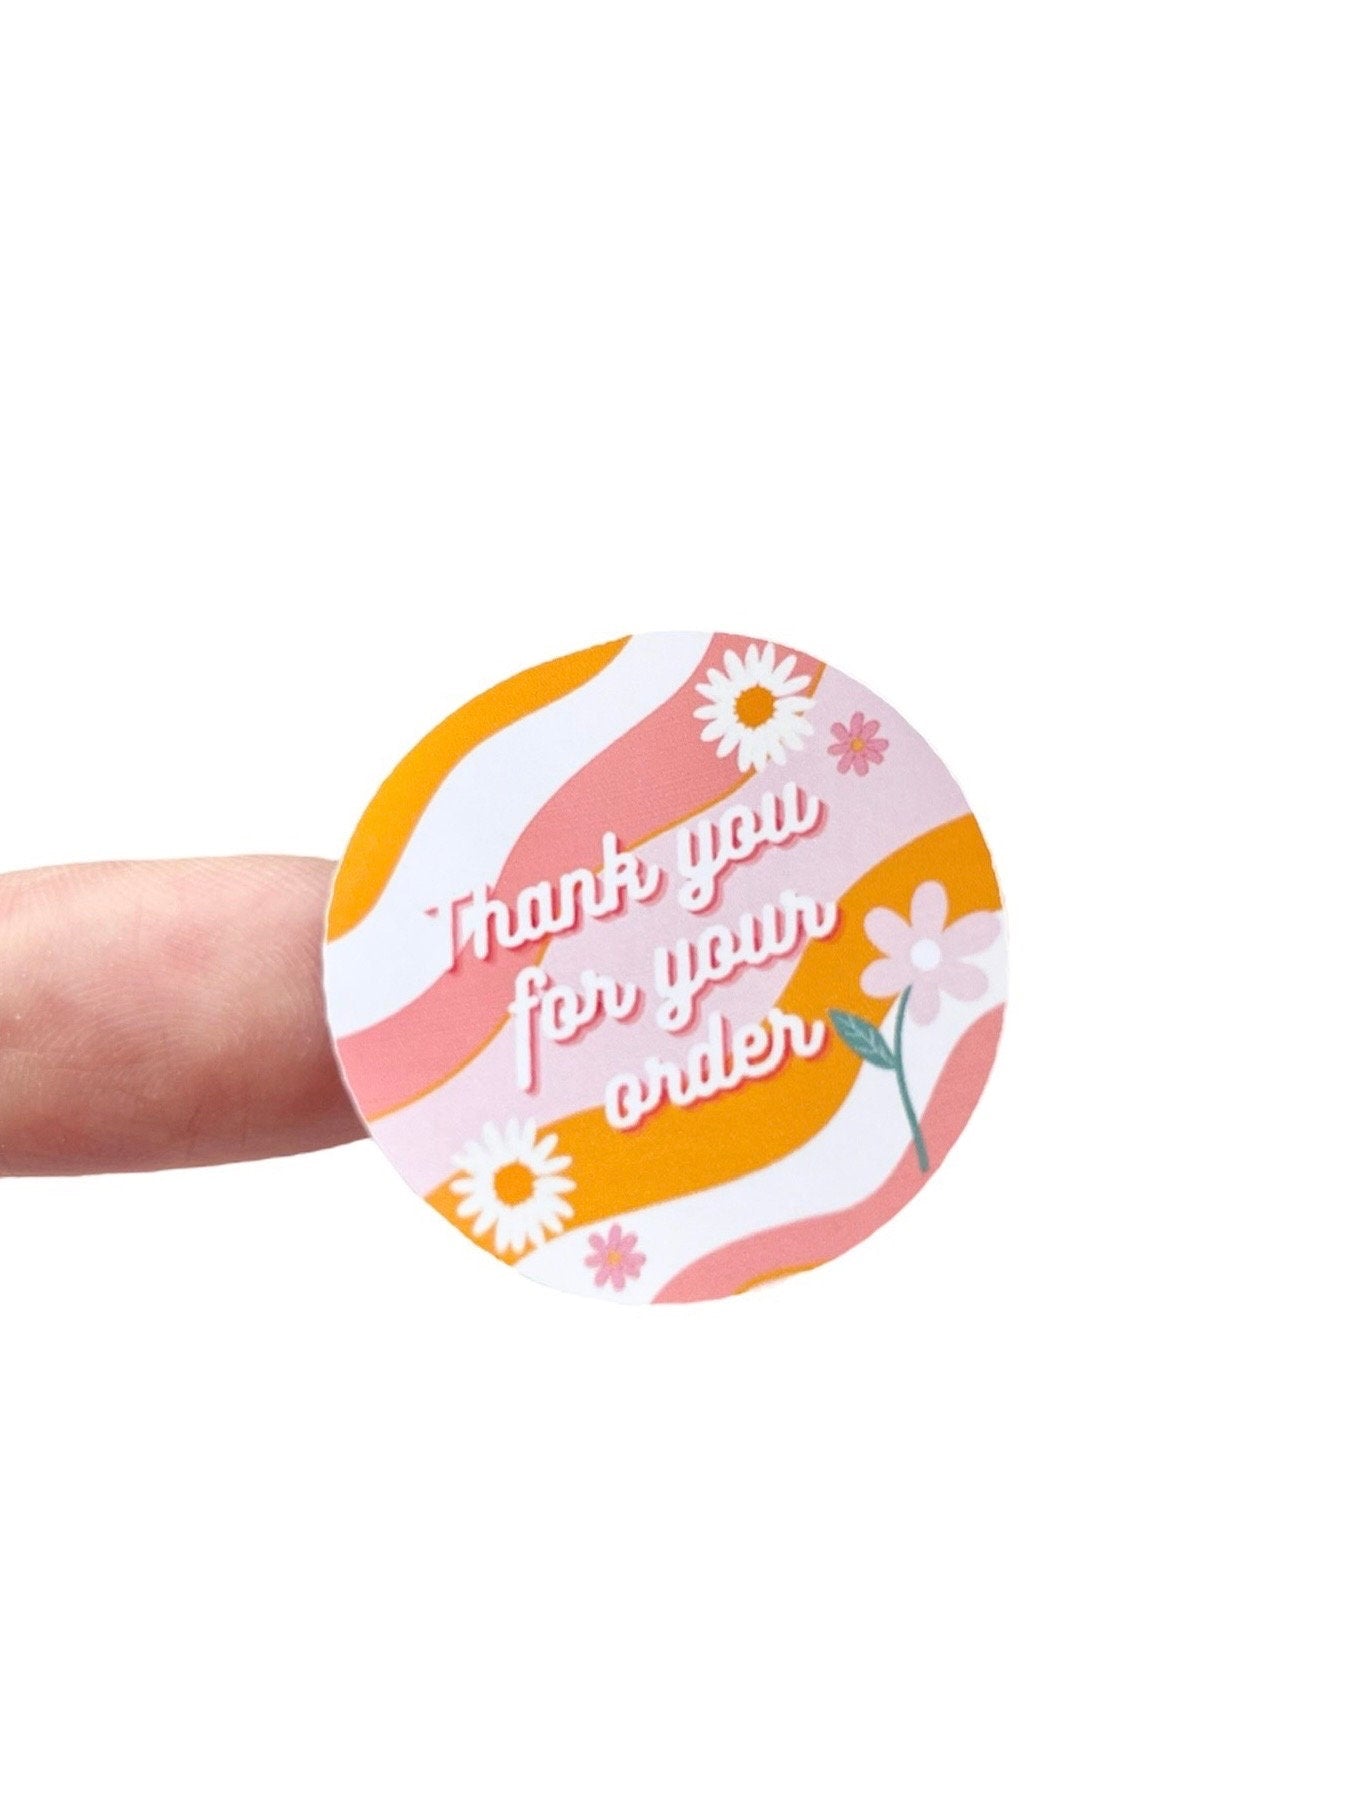 Thank You For Your Order retro stickers | 38mm Sticker | Small Business Labels